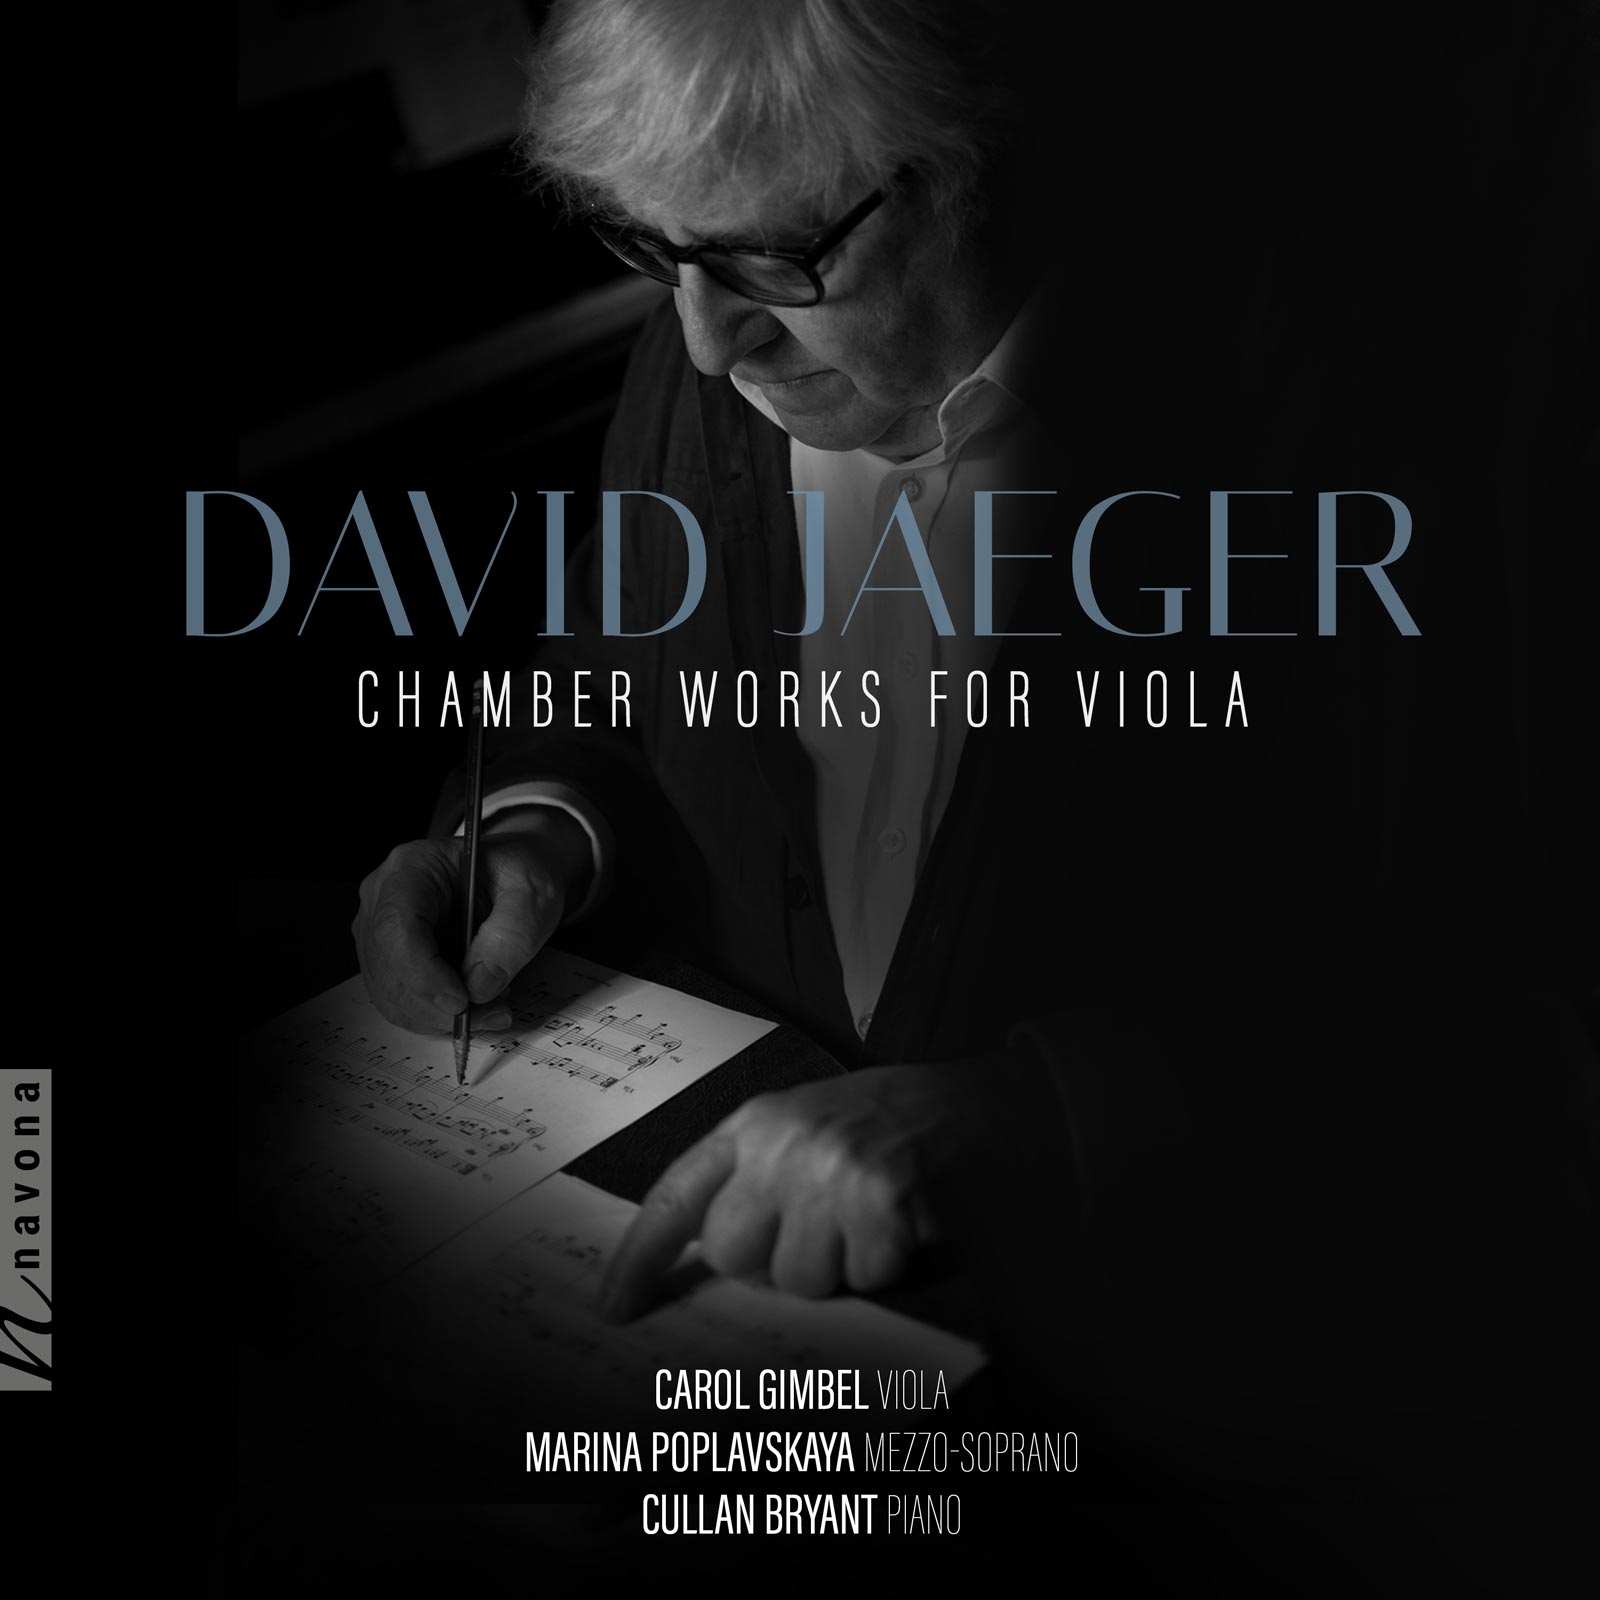 CHAMBER WORKS FOR VIOLA